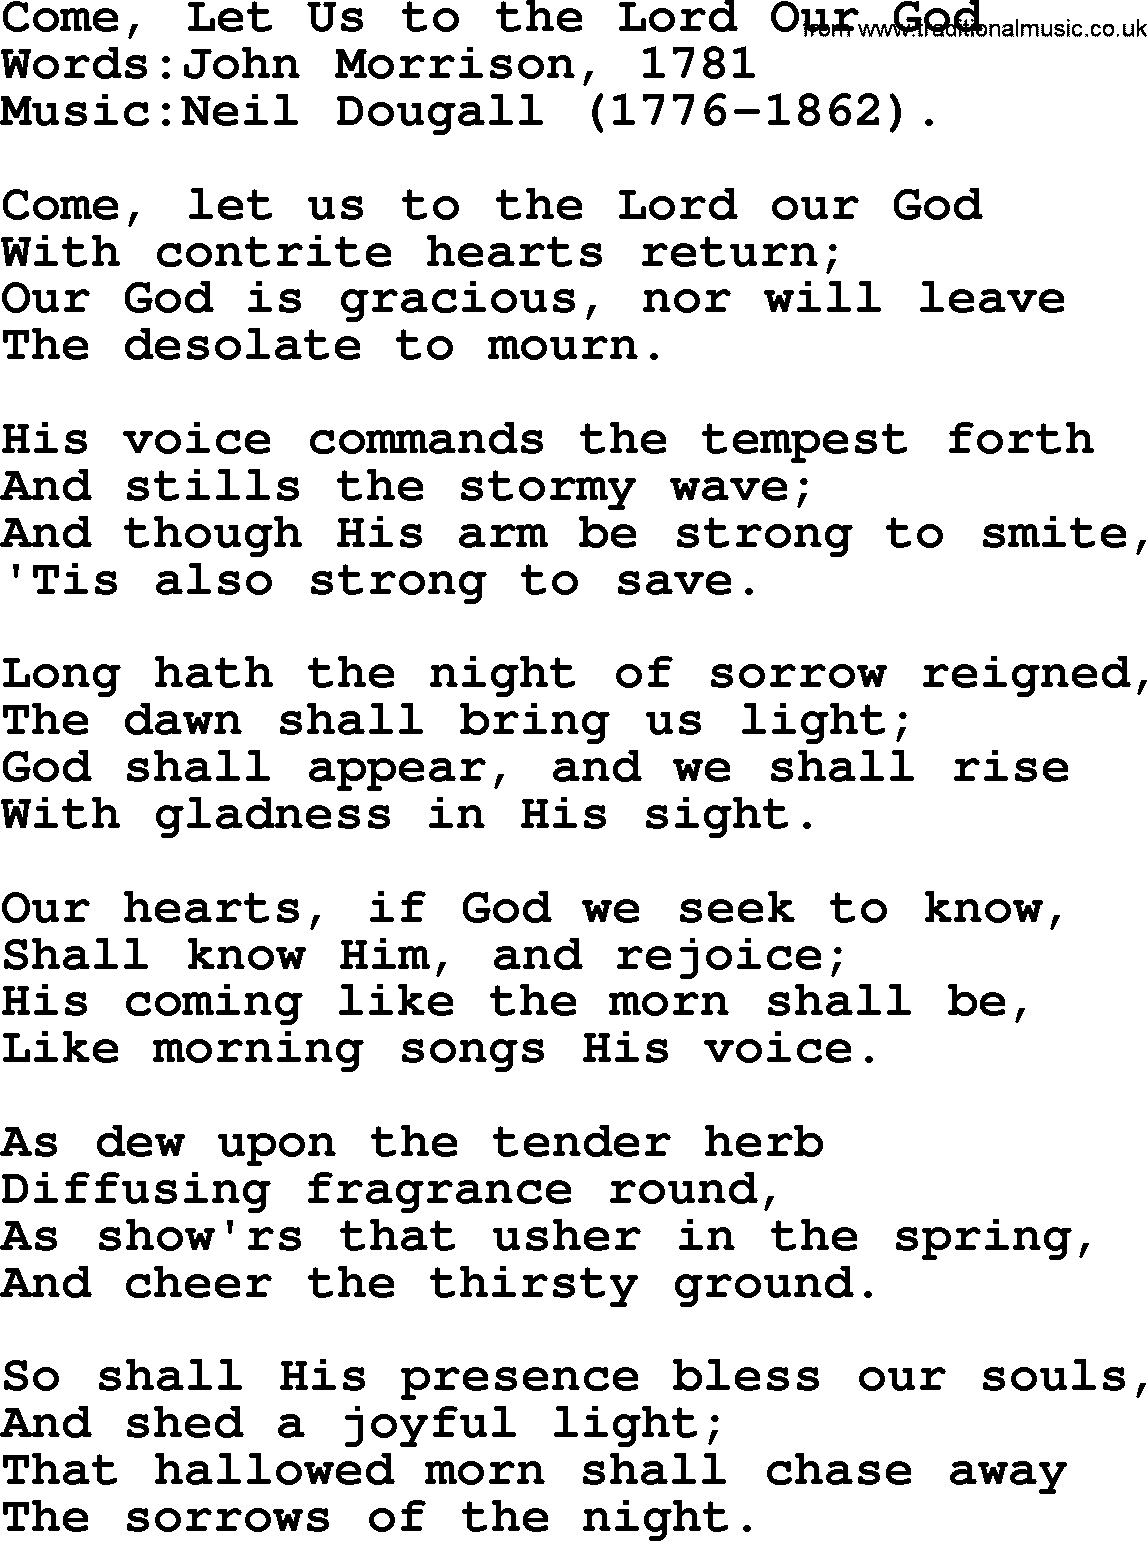 Christian hymns and songs about Jesus' Return(The Second Coming): Come, Let Us To The Lord Our God, lyrics with PDF